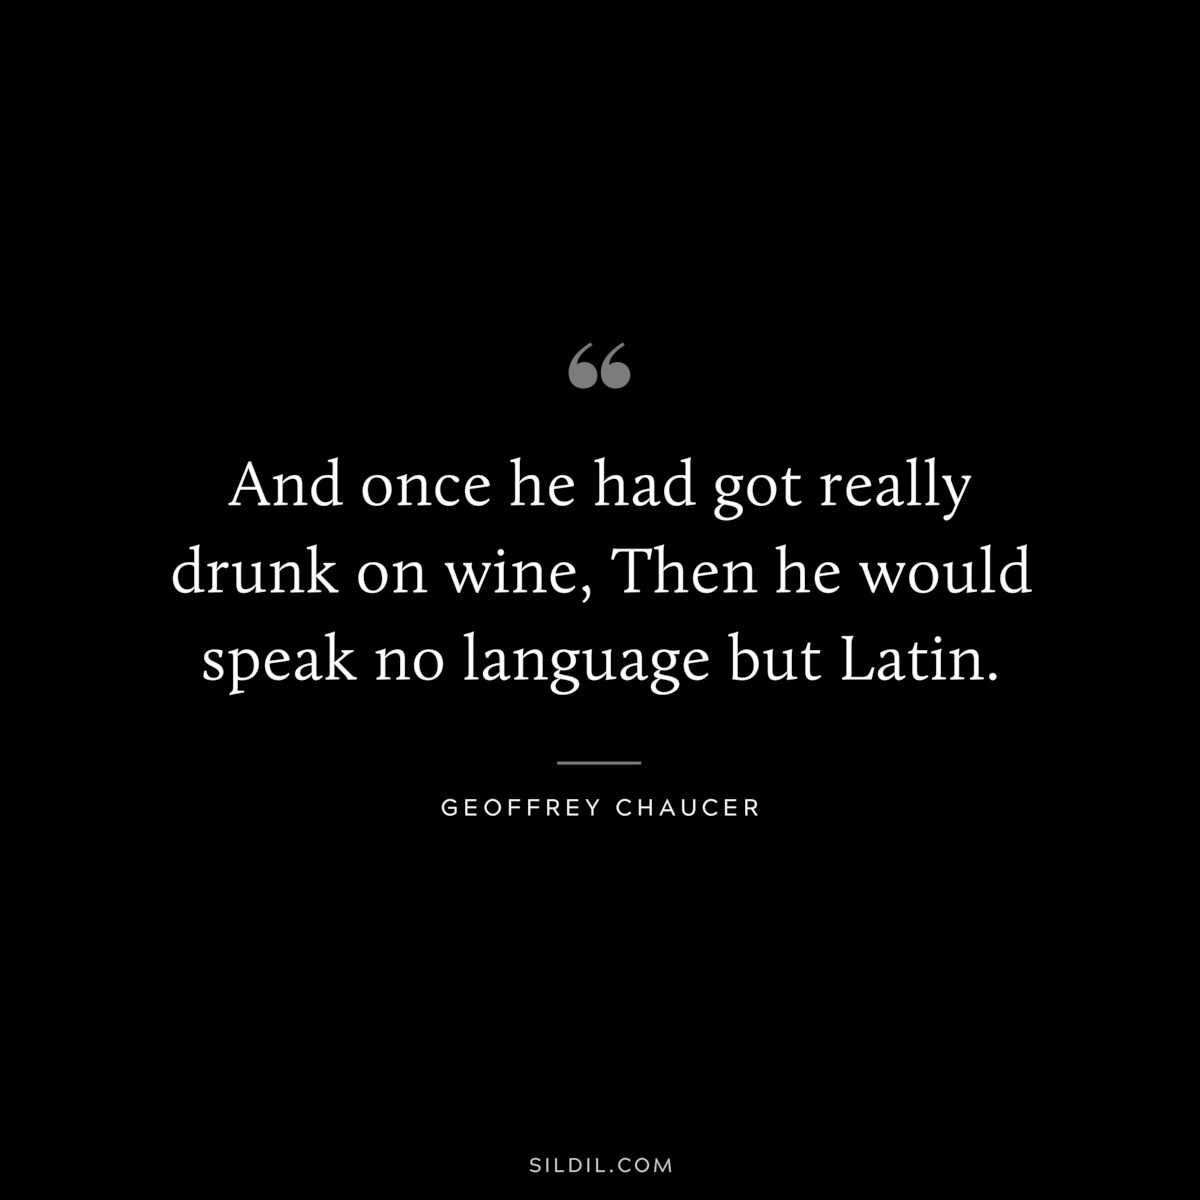 And once he had got really drunk on wine, Then he would speak no language but Latin. ― Geoffrey Chaucer